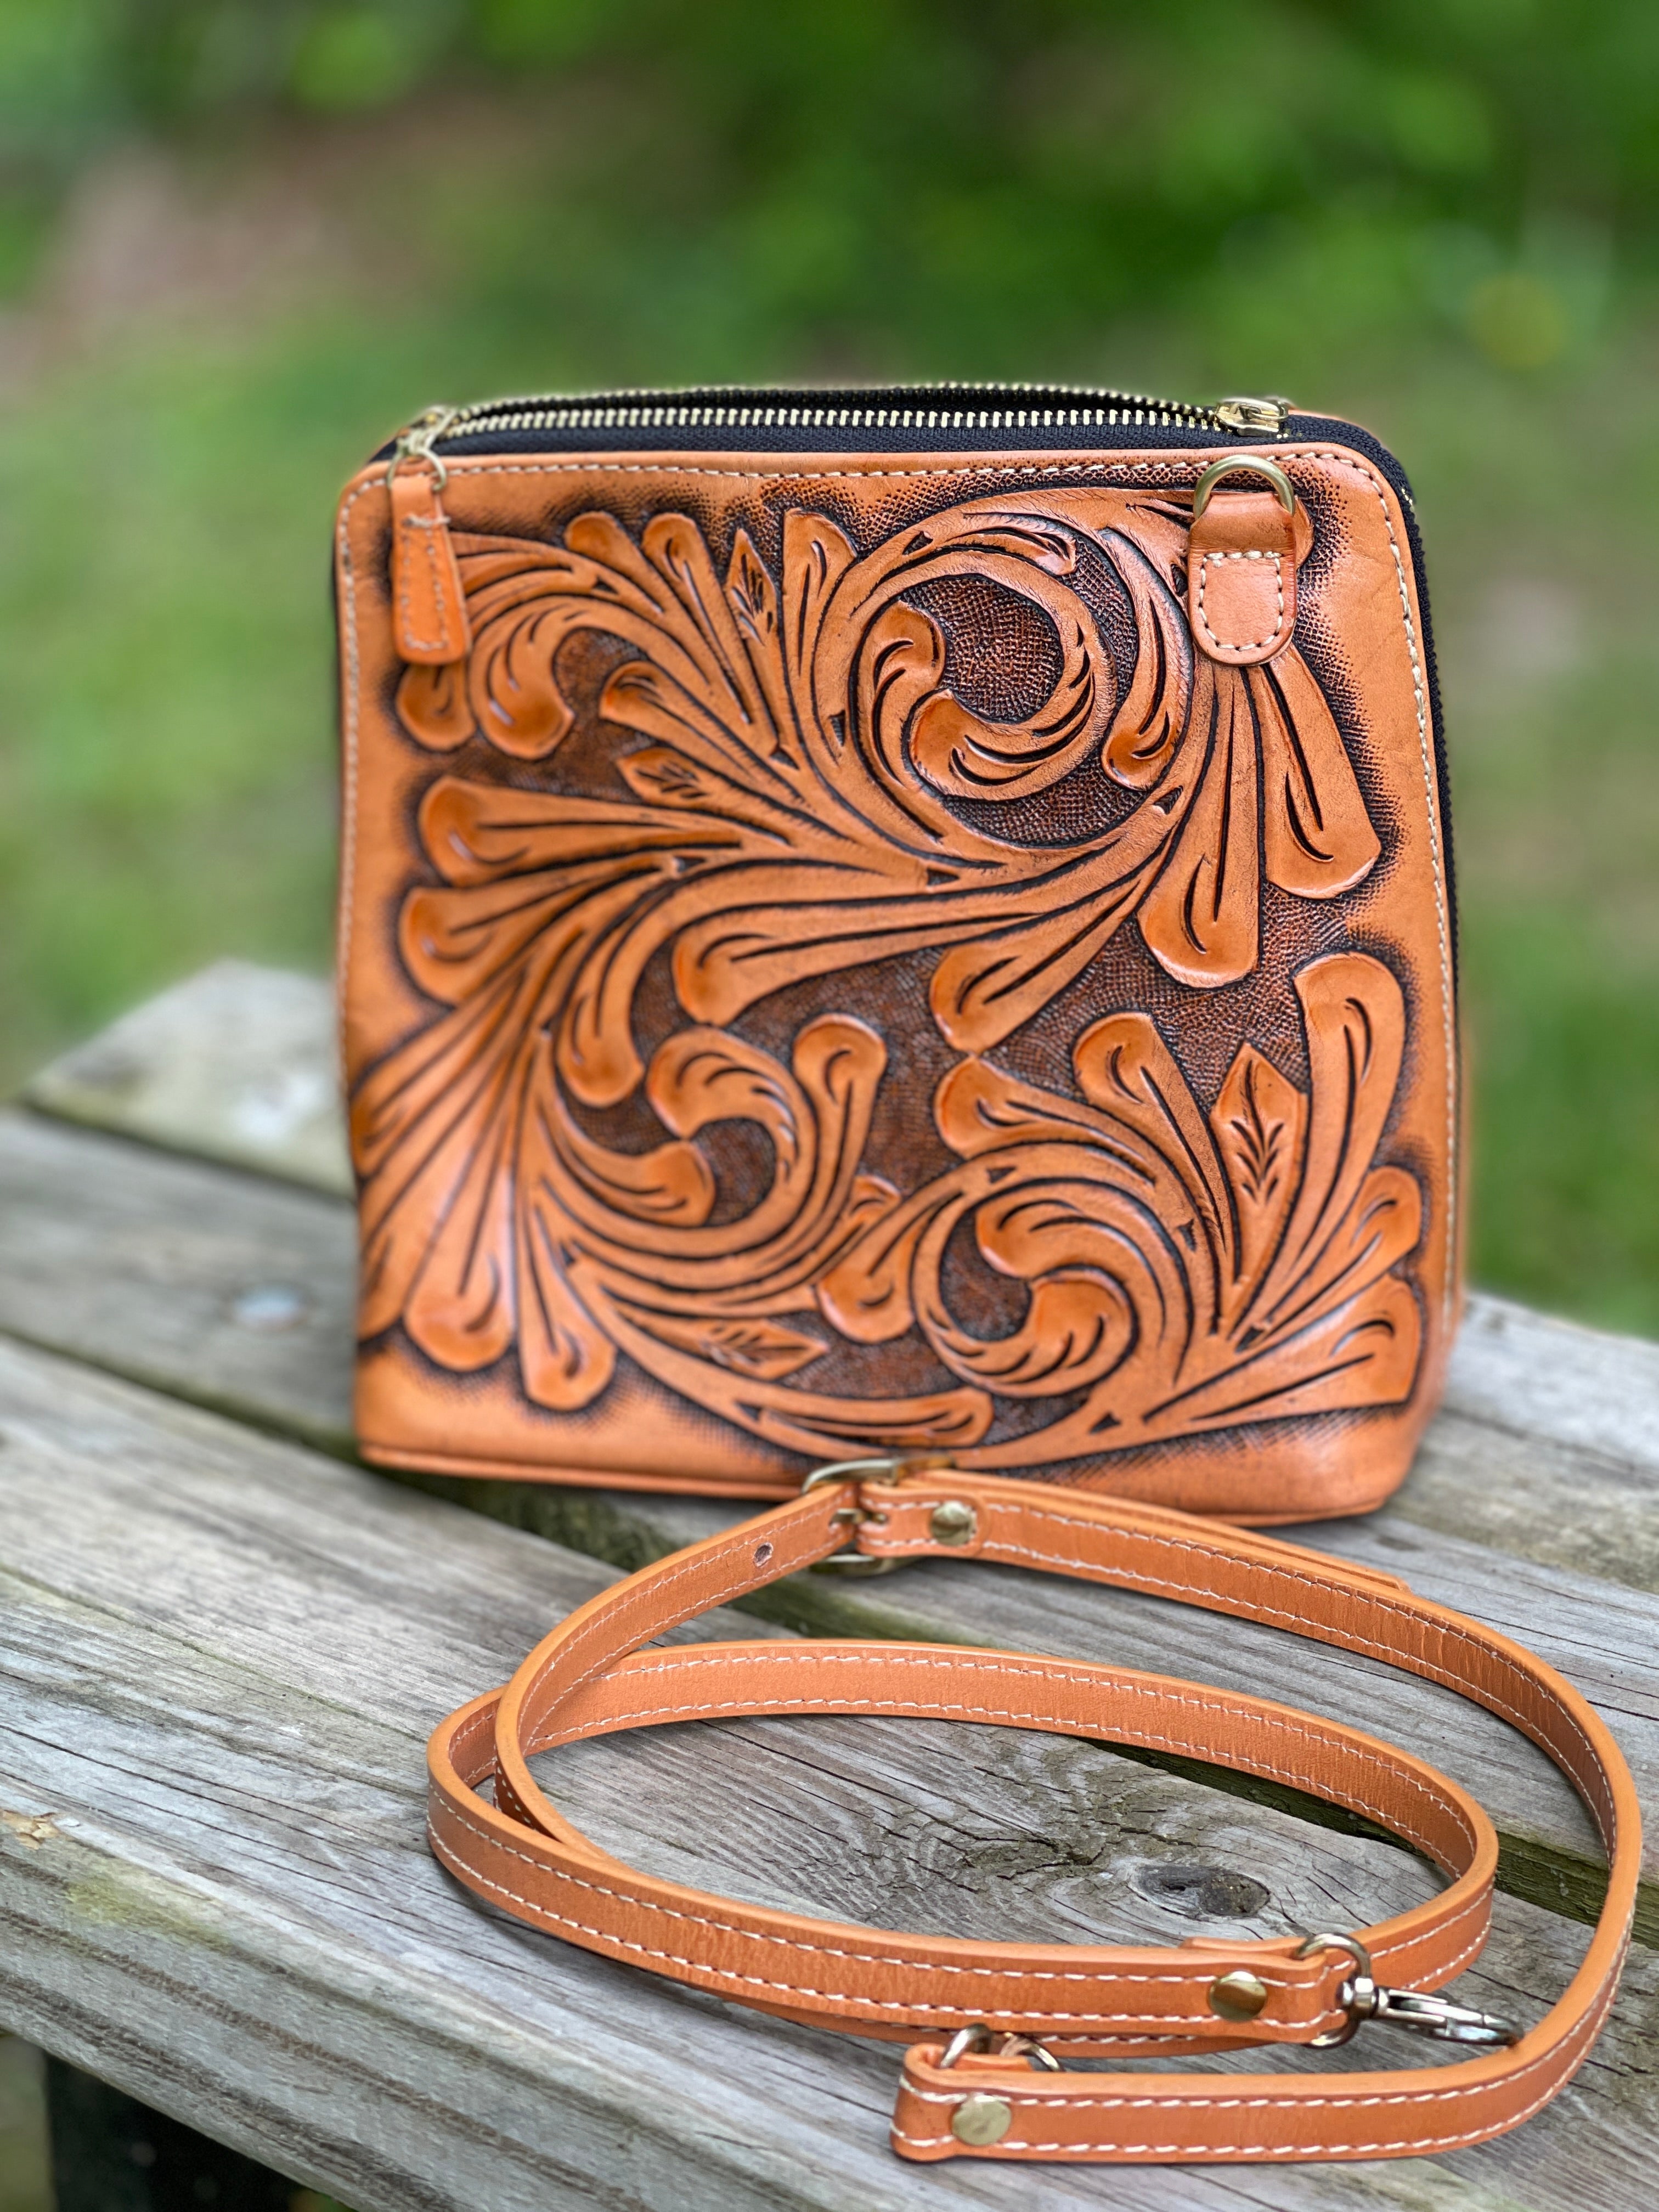 Hand-tooled Leather Satchel, Brown Leather Purse, Maletin , Western Style,  Shoulder Bag, Gifts for Her, Doctor Bag,, Holiday Gifts - Etsy